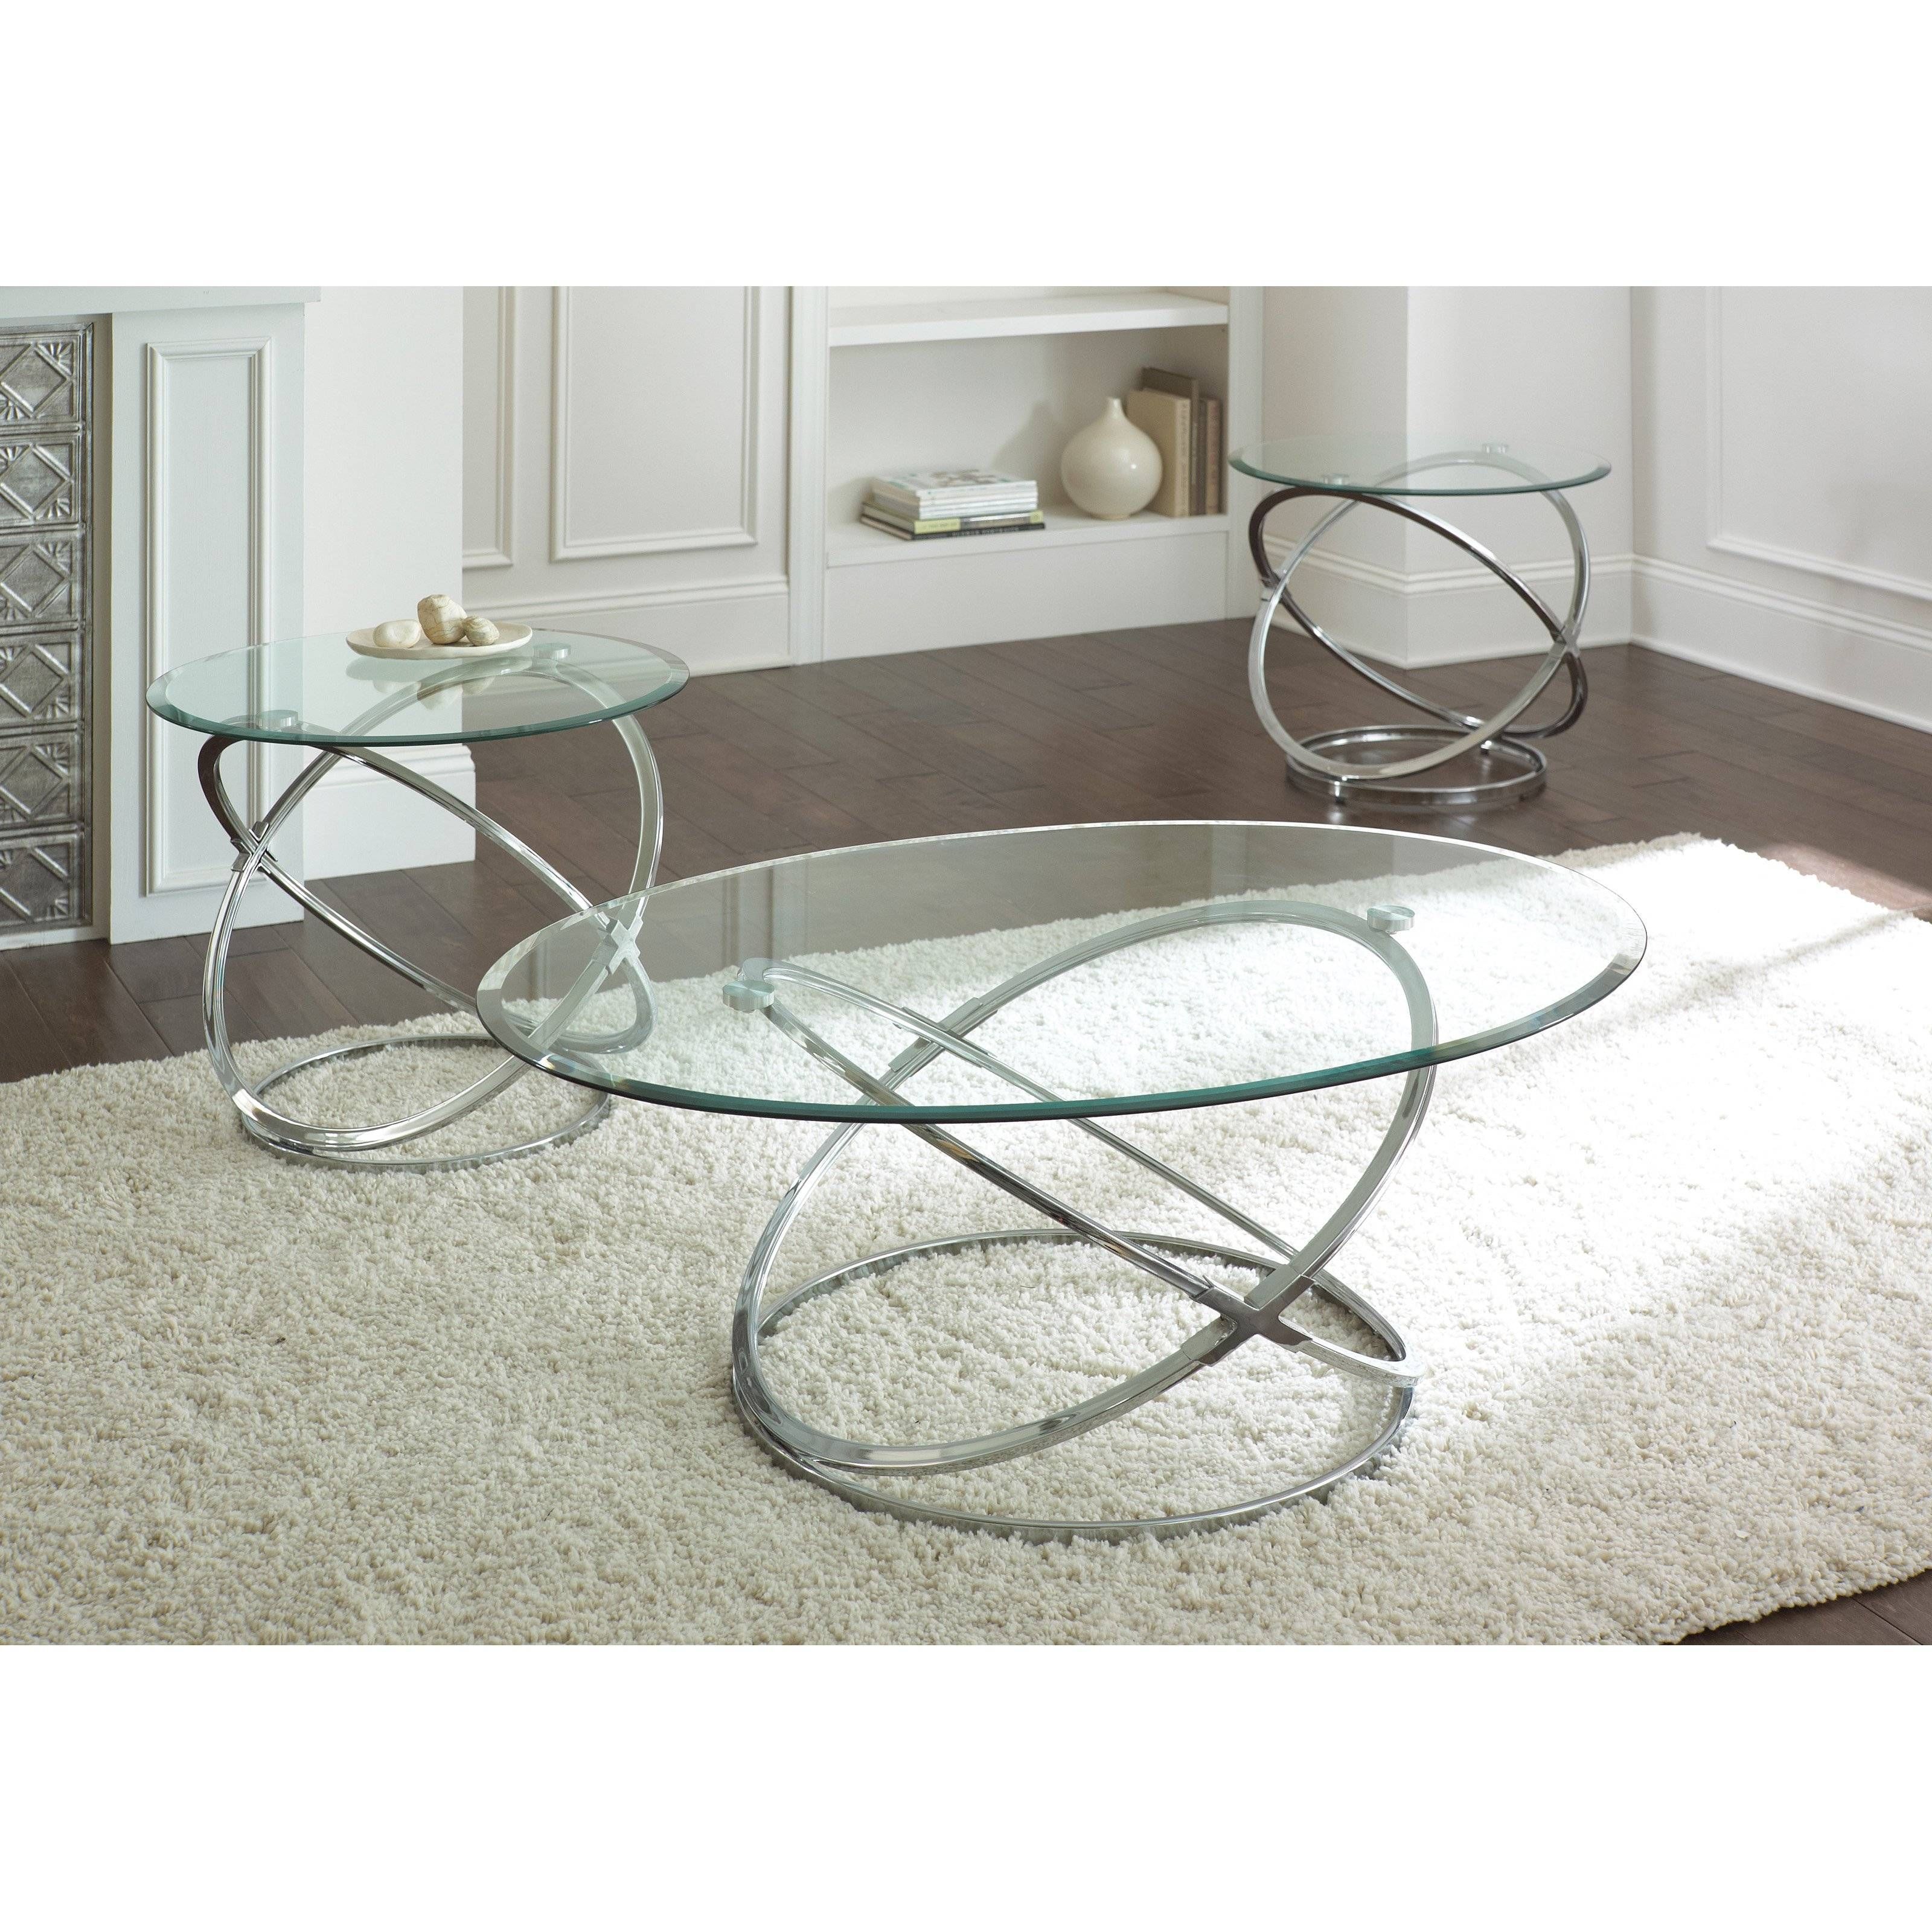 Silver Round Coffee Table – Hammered Silver Round Coffee Table With Regard To Hammered Silver Coffee Tables (View 28 of 30)